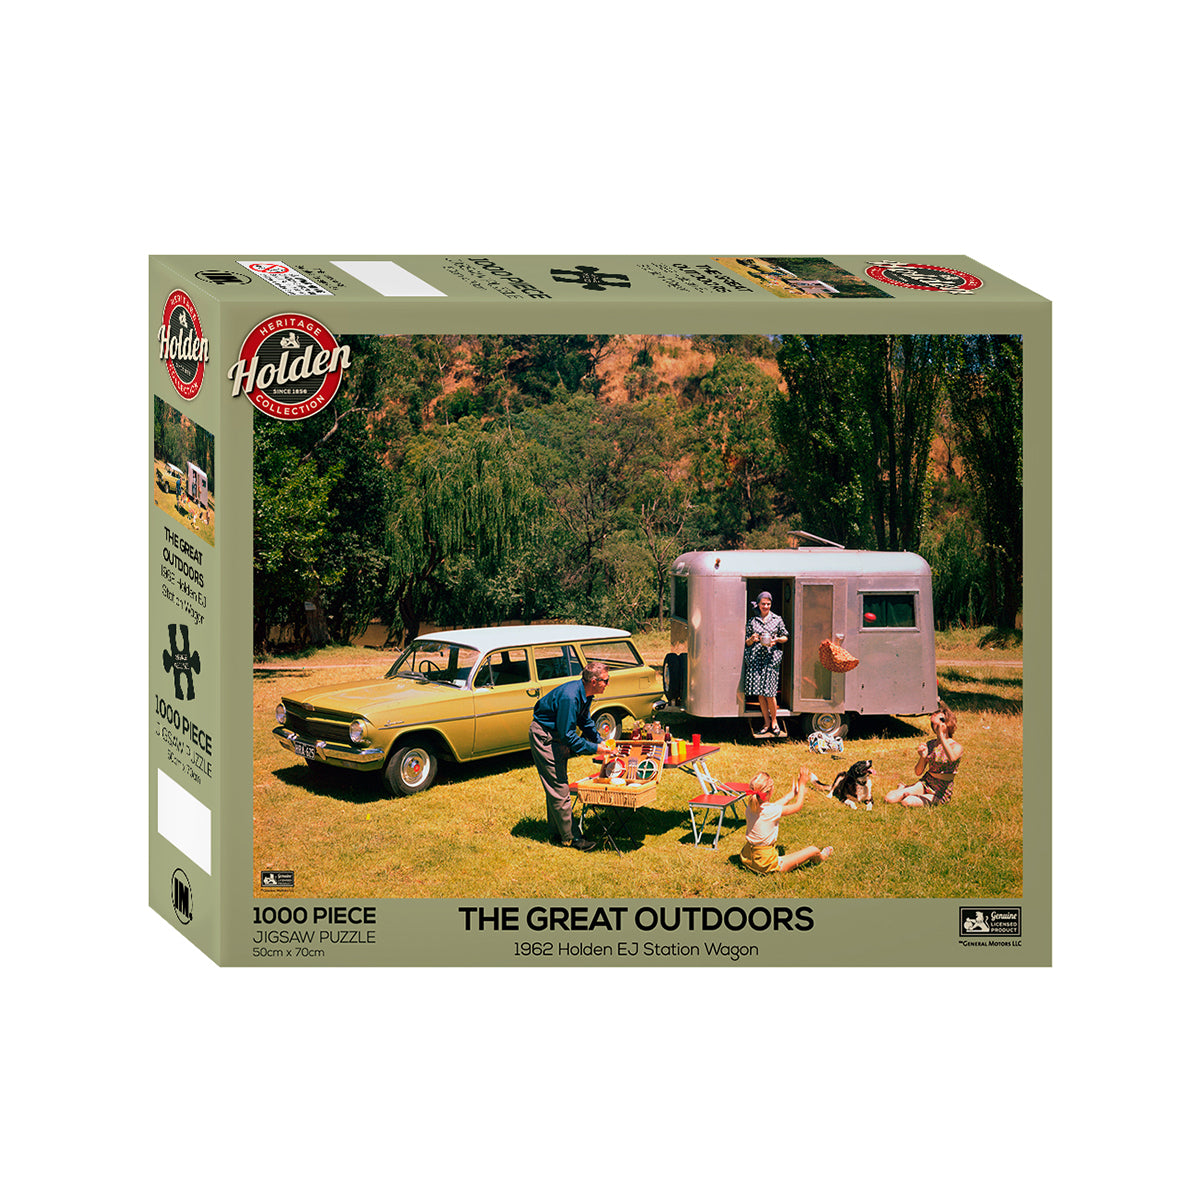 Holden Puzzle - The Great Outdoors